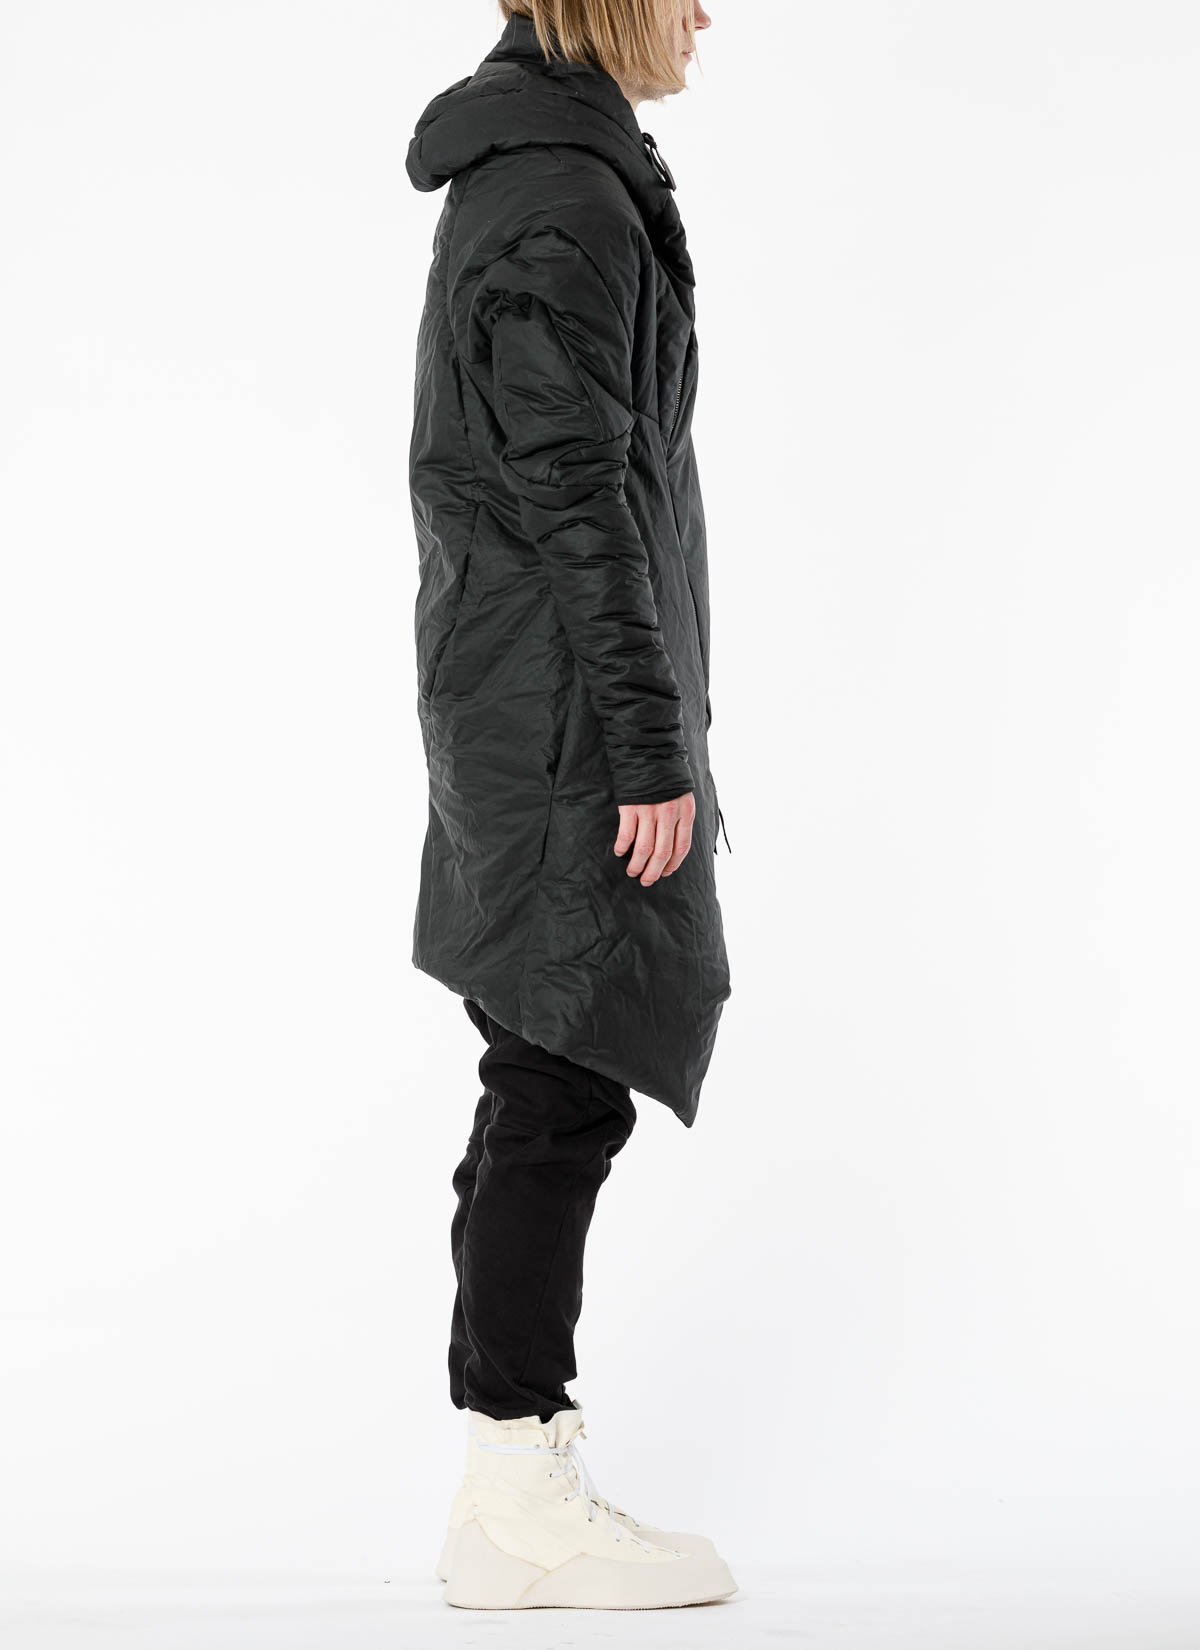 hide-m | LEON EMANUEL BLANCK Curved Hooded Coat, waxed cotton